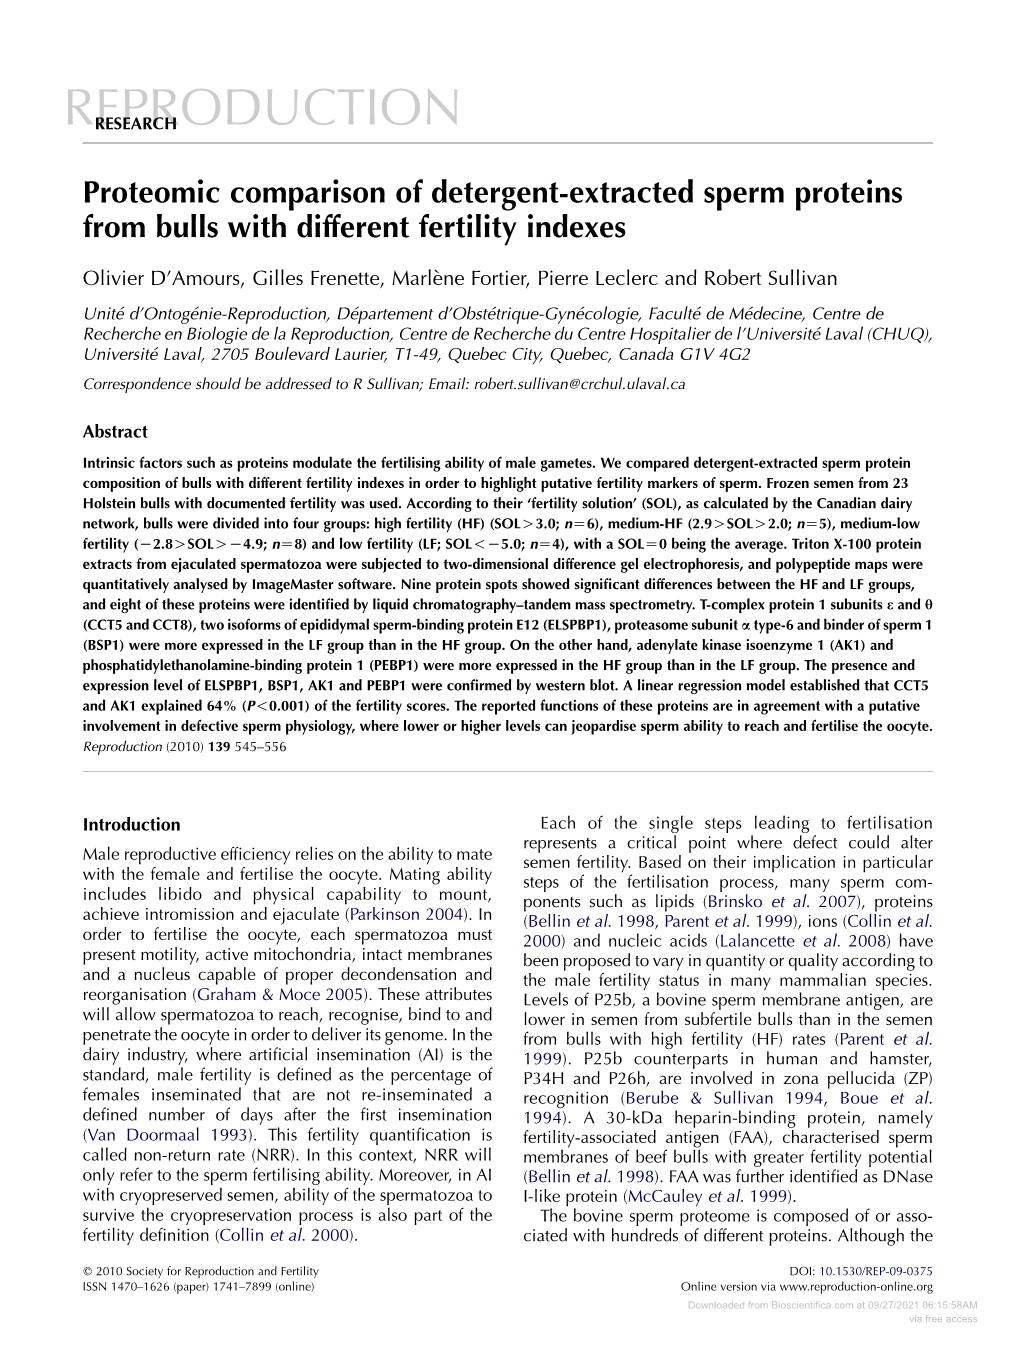 Proteomic Comparison of Detergent-Extracted Sperm Proteins from Bulls with Different Fertility Indexes